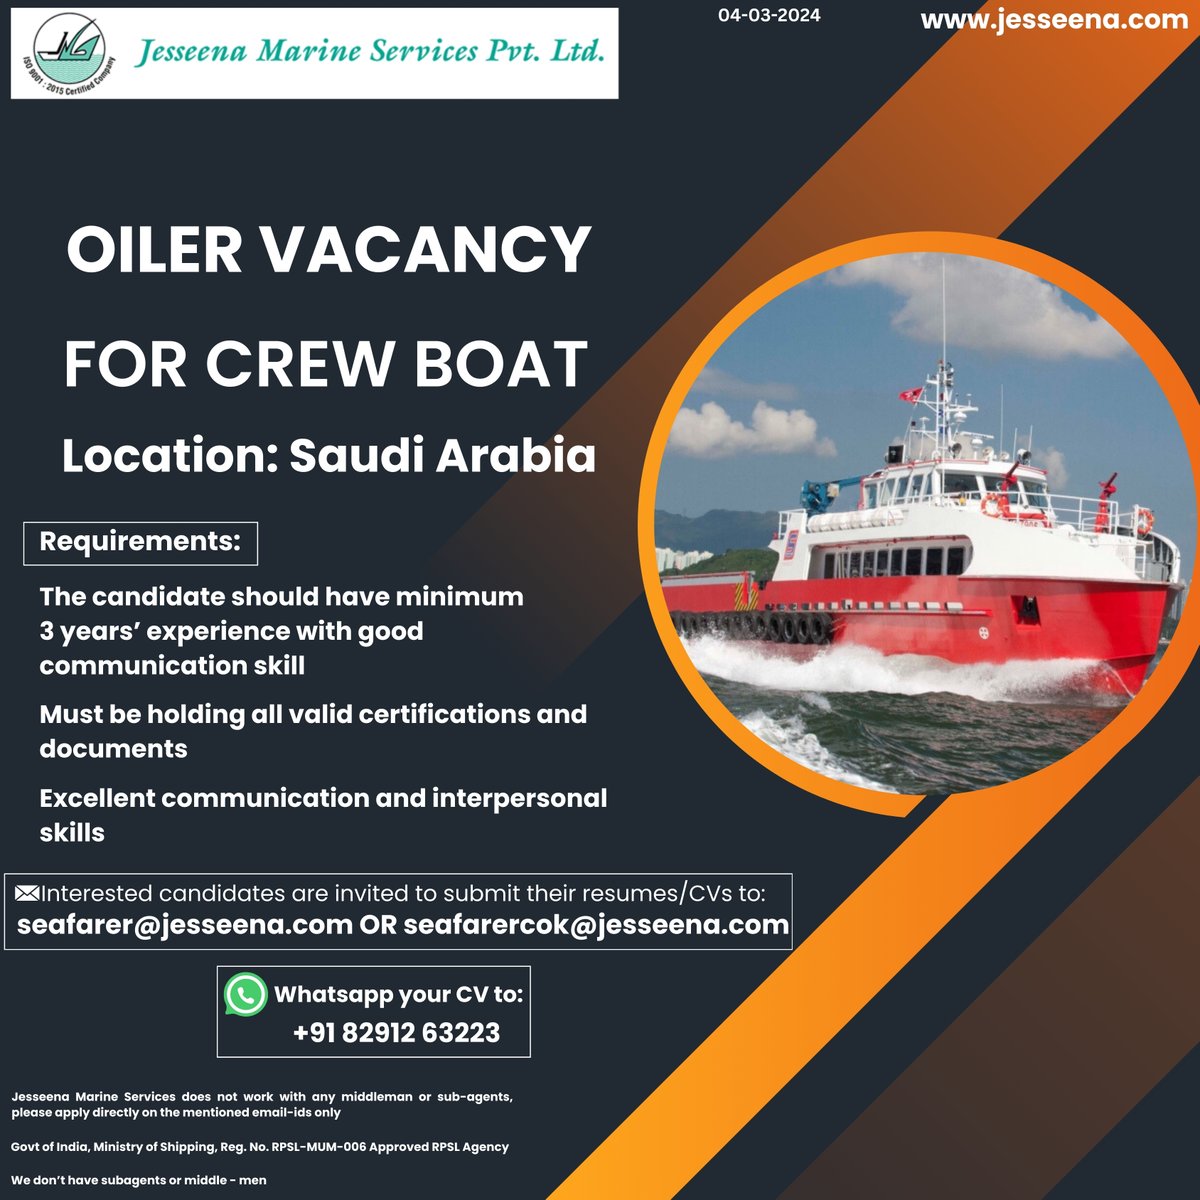 Oiler vacancy for crew boat in saudi arabia

Interested candidates are invited to submit their resumes/CVs to:
seafarer@jesseena.com OR seafarercok@jesseena.com

#OilerVacancy #CrewBoat #MaritimeCareersKSA #SeafarerOpportunities #OilerRole #MarineRecruitment #CrewBoatVacancy